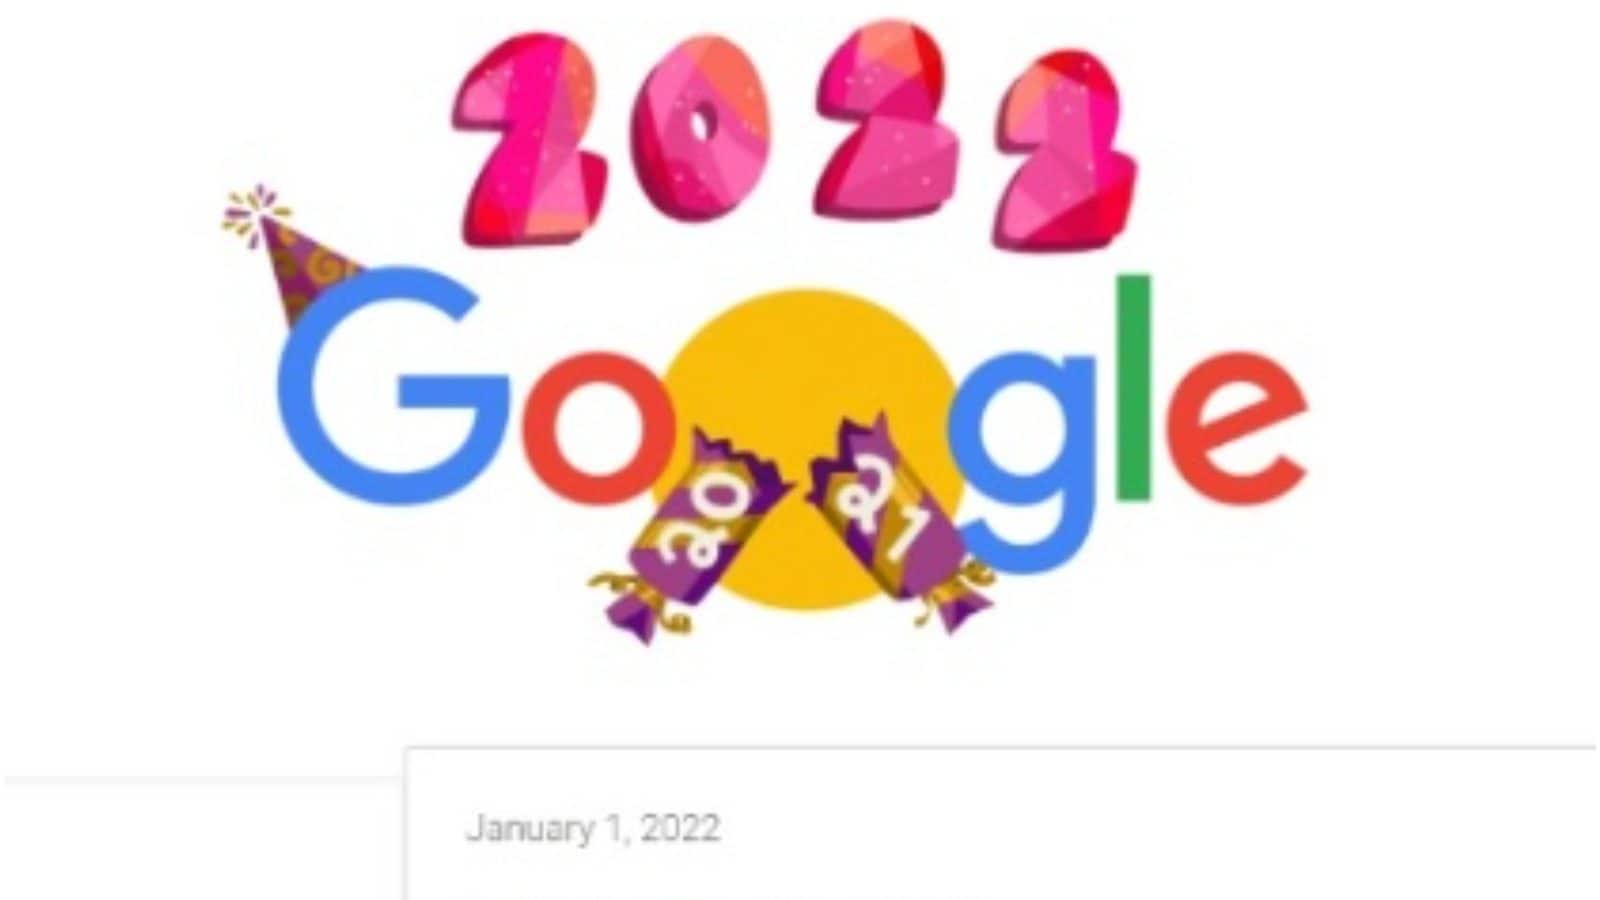 Google Doodle New Year 2022 with an Animated Candy